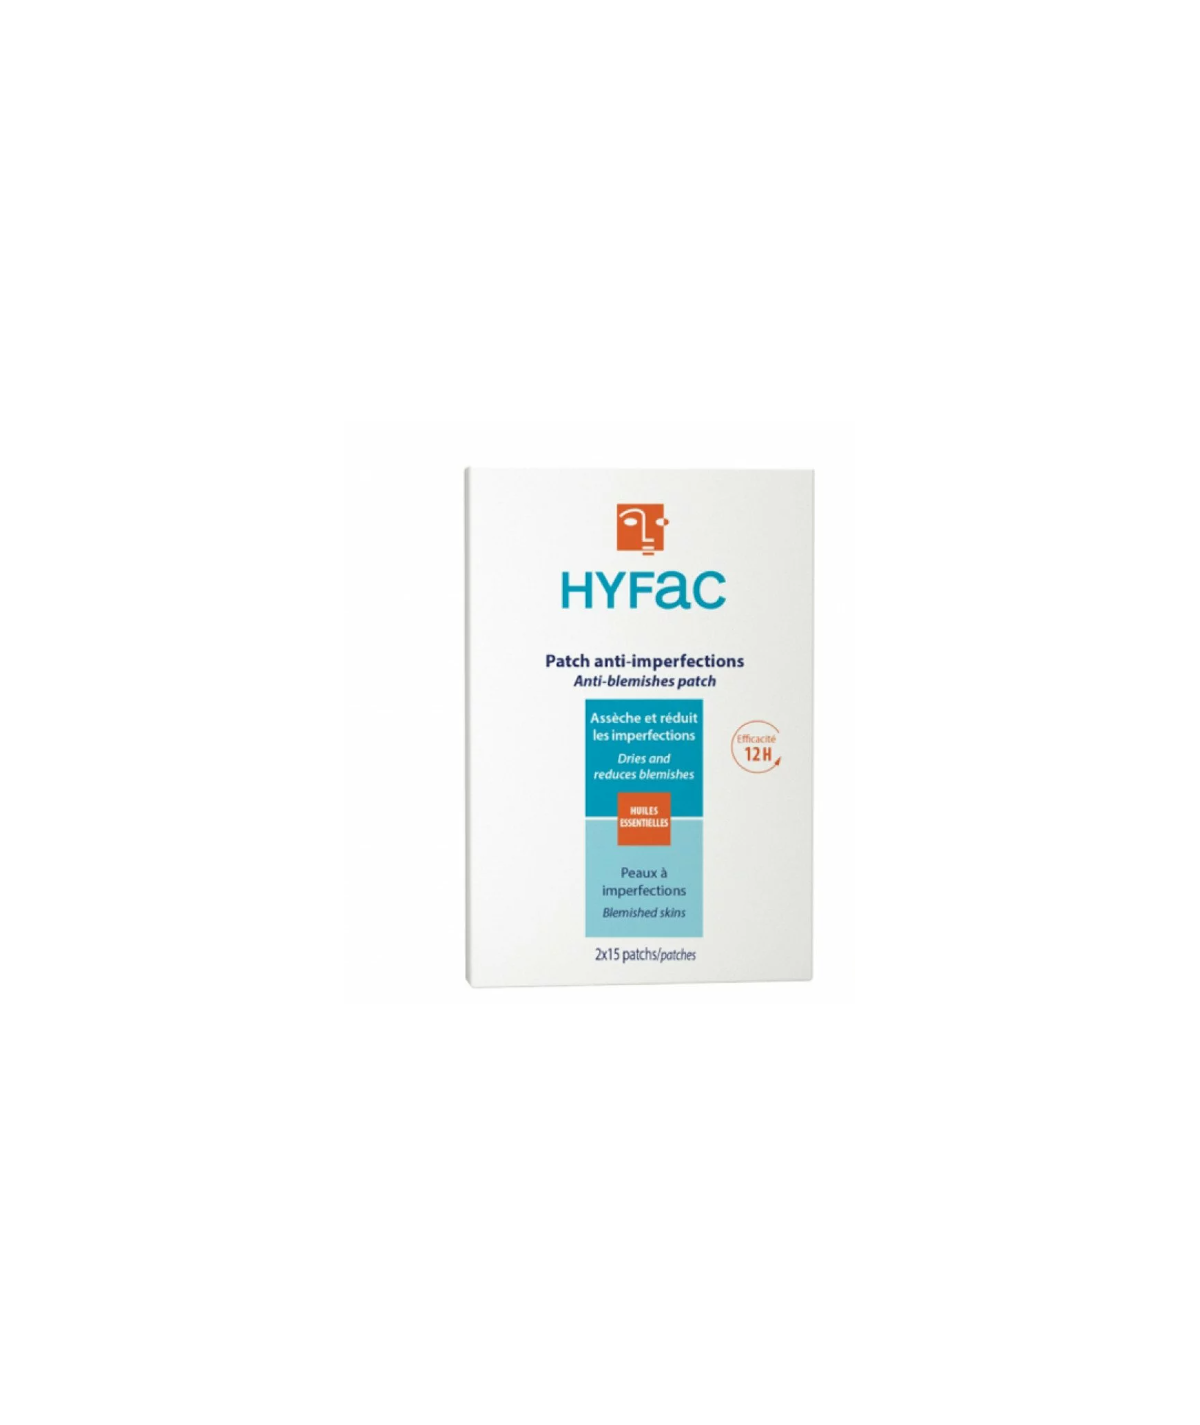 Hyfac Patch Anti Imperfections